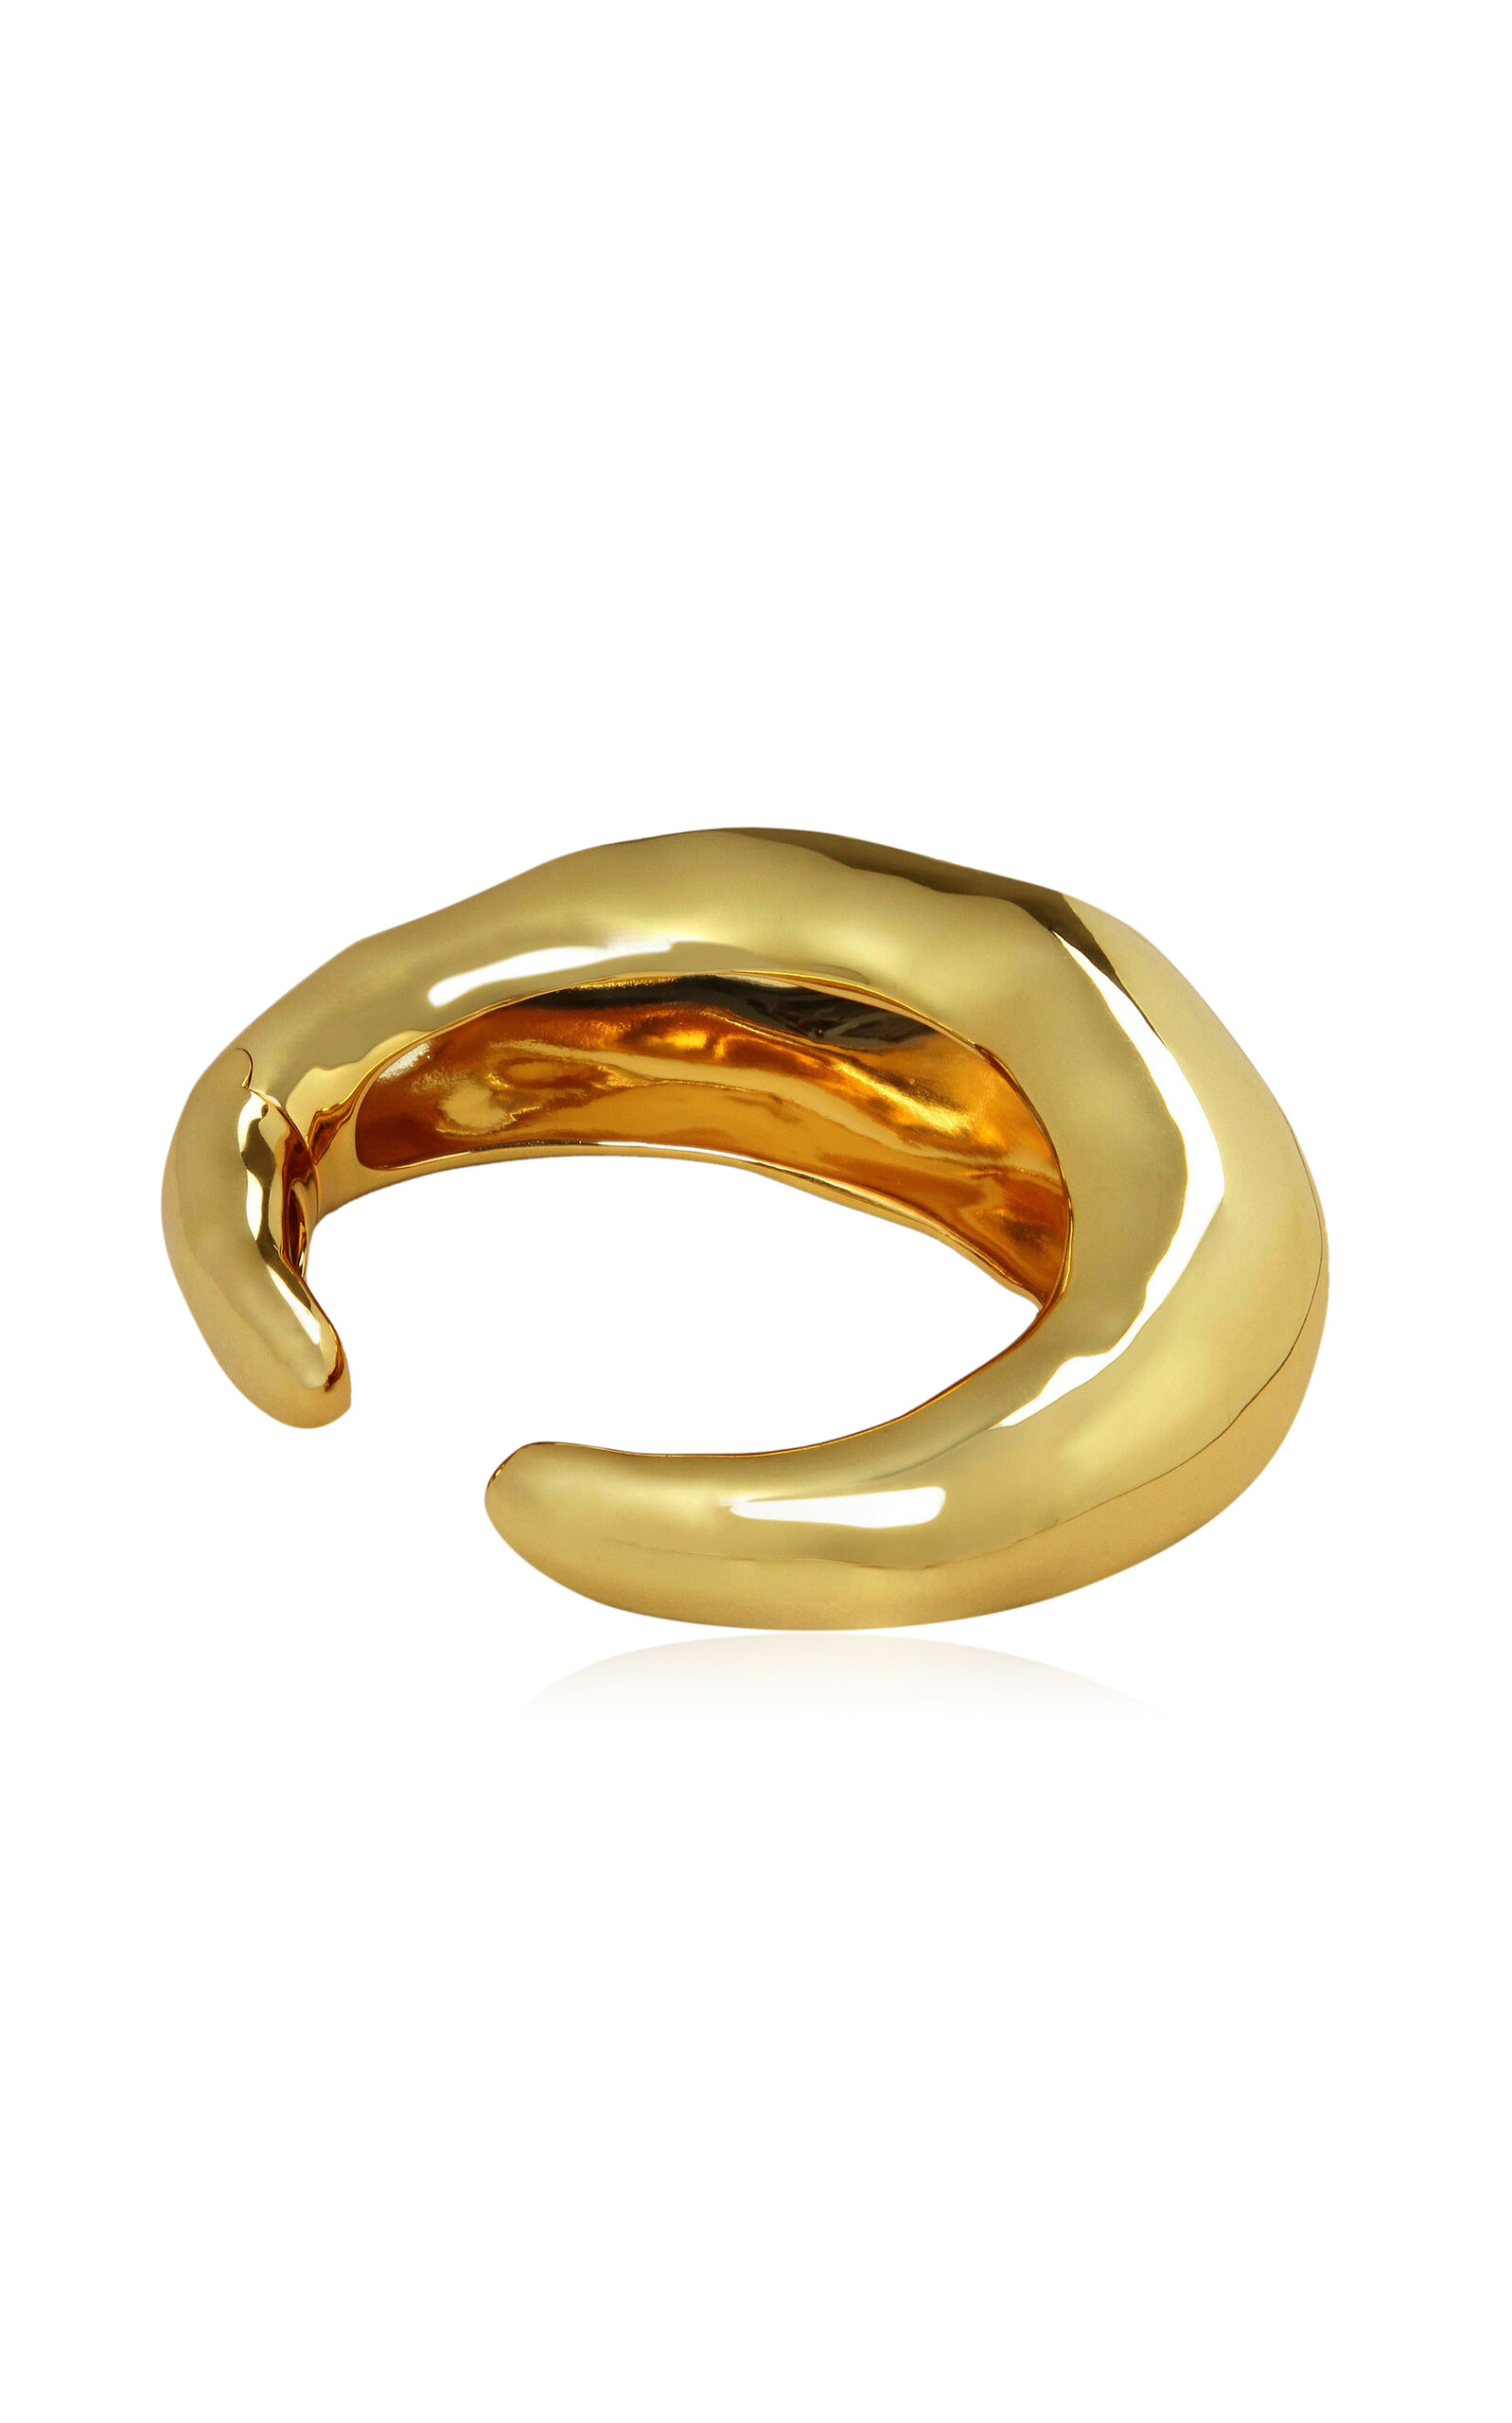 Large Molten 14K Gold-Plated Cuff